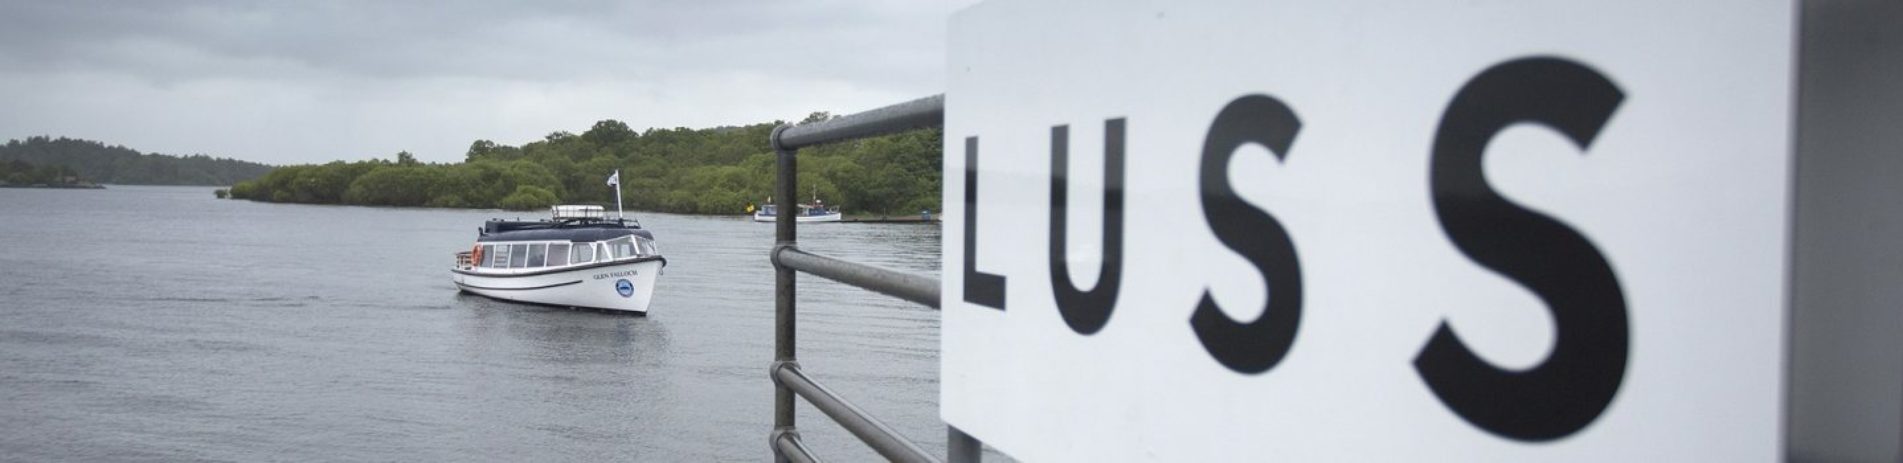 luss-pier-with-luss-name-sign-on-metal-bars-waterbus-on-loch-lomond-approaching-shore